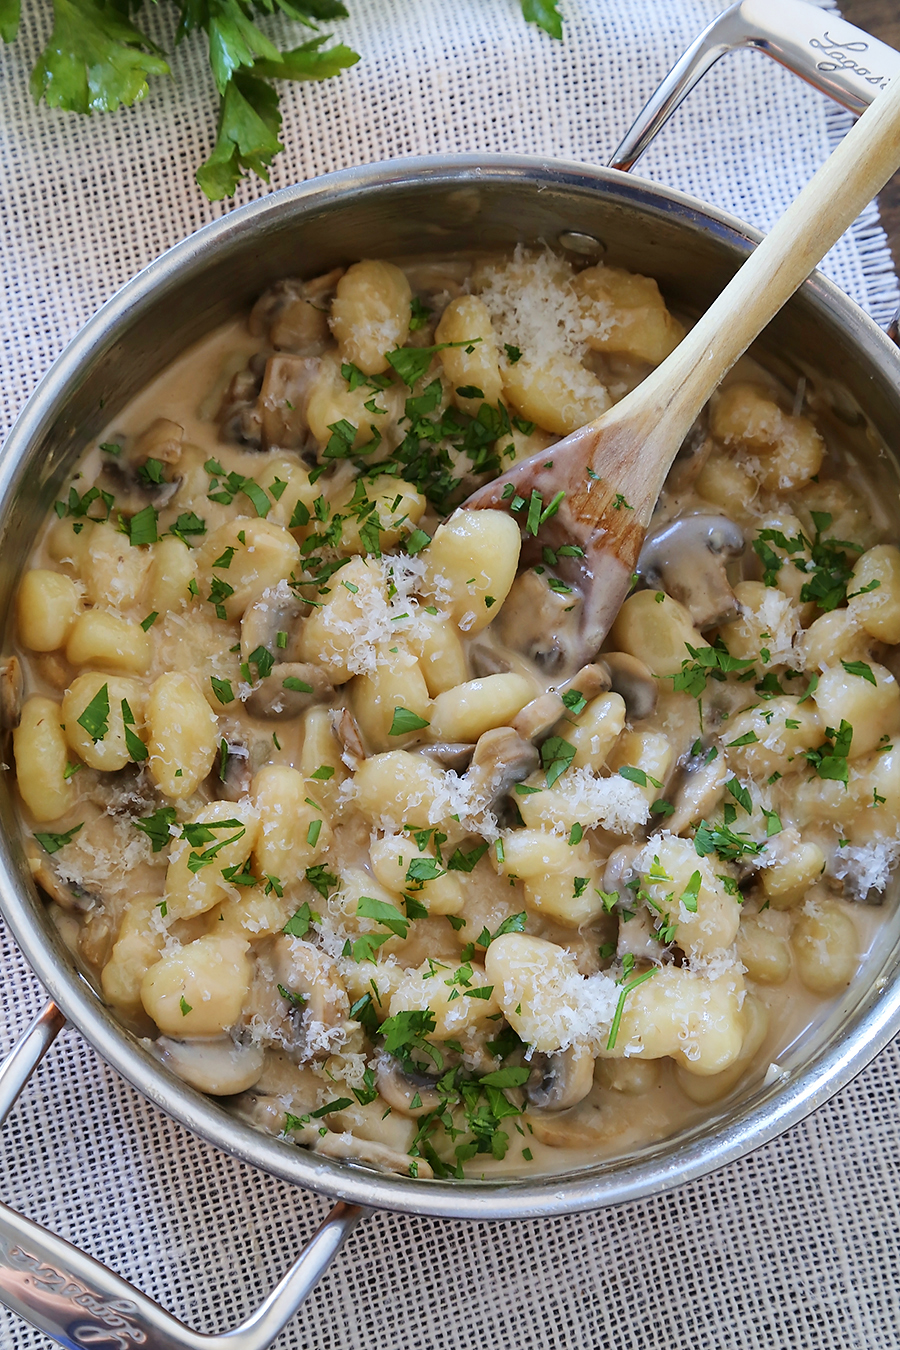 10-Minute Creamy Marsala Mushroom Gnocchi - SO delicious, quick and easy! All it takes is a handful of pantry staples and 10 minutes to prepare this easy, elegant Italian dish! thecomfortofcooking.com